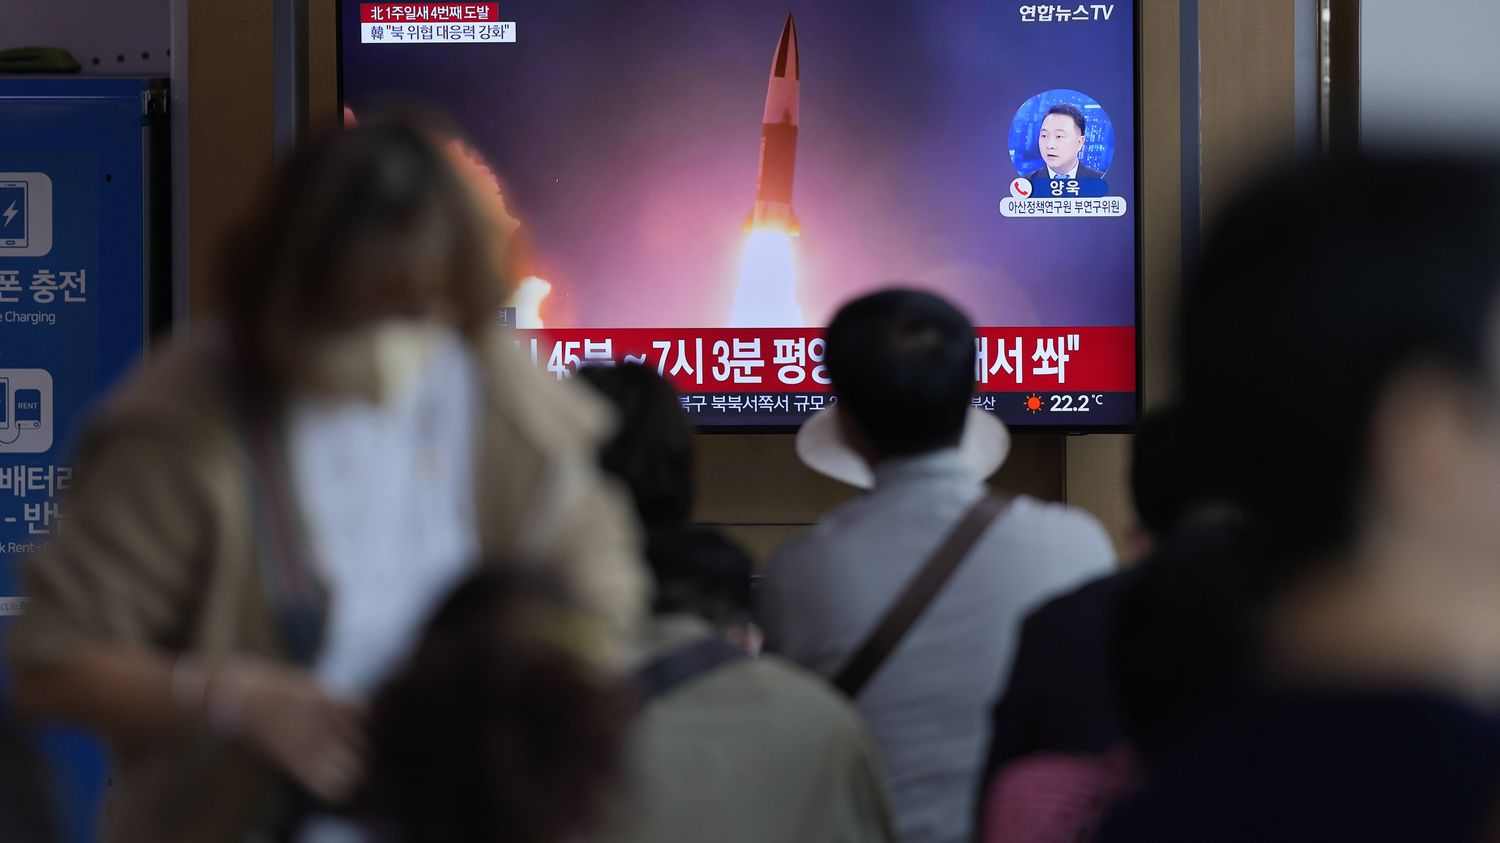 North Korea fires missiles for fourth time in a week
